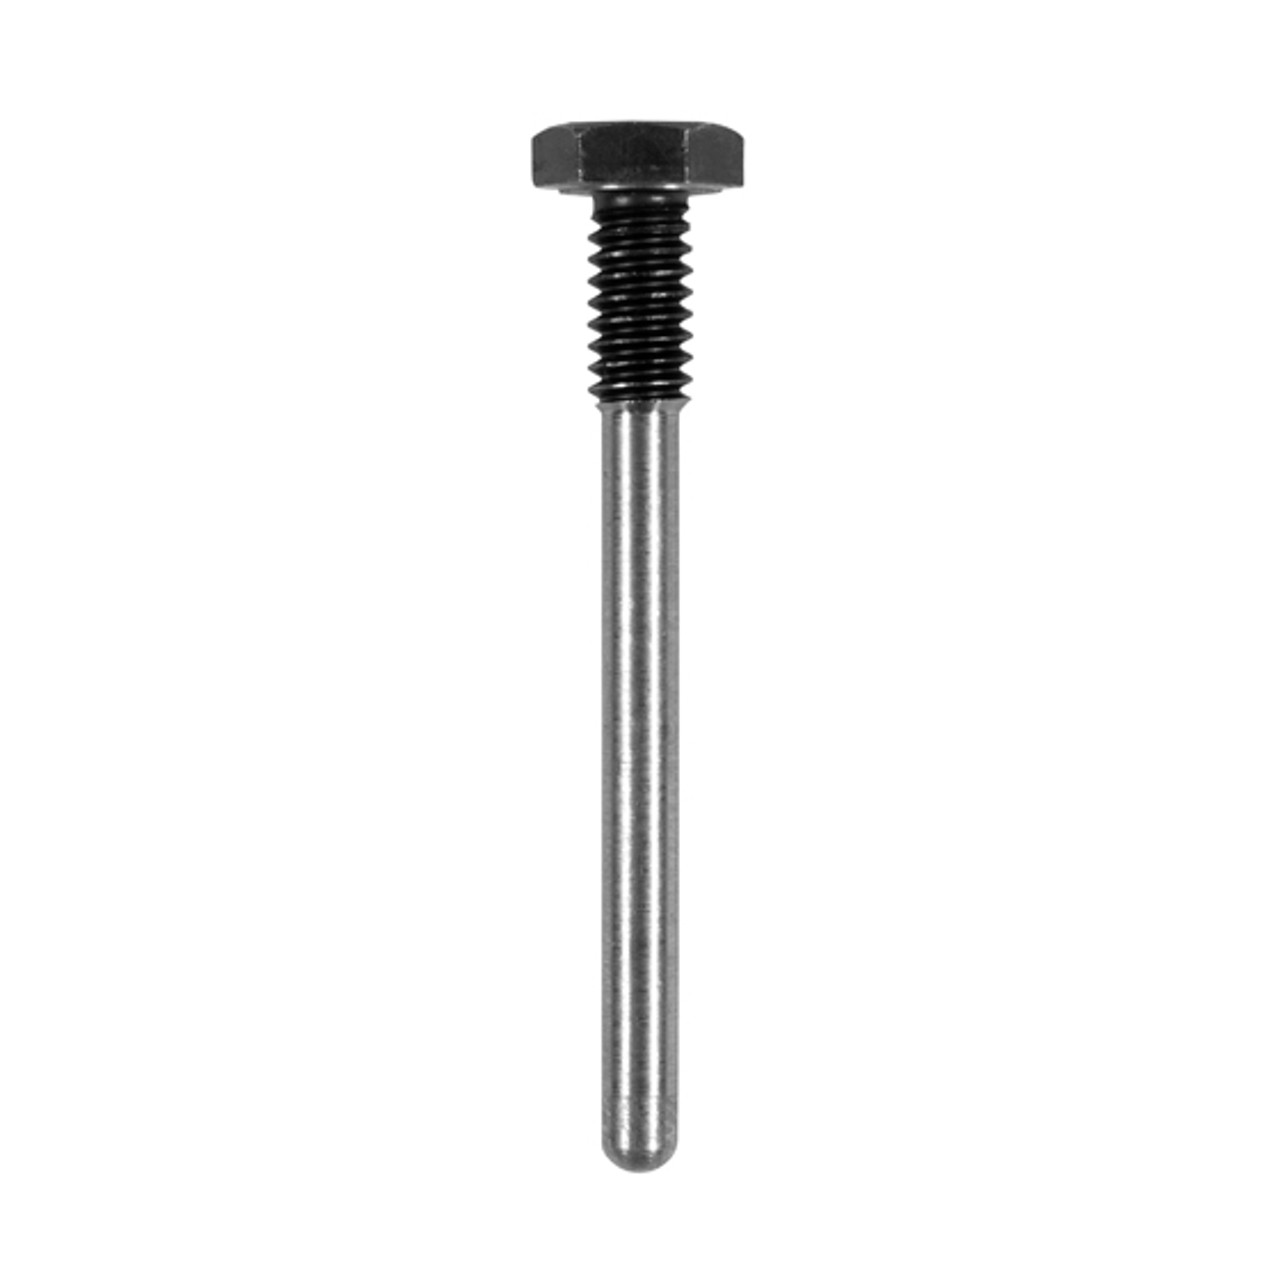 positraction cross pin bolt for for 8.2" GM and Cast Iron Corvette.